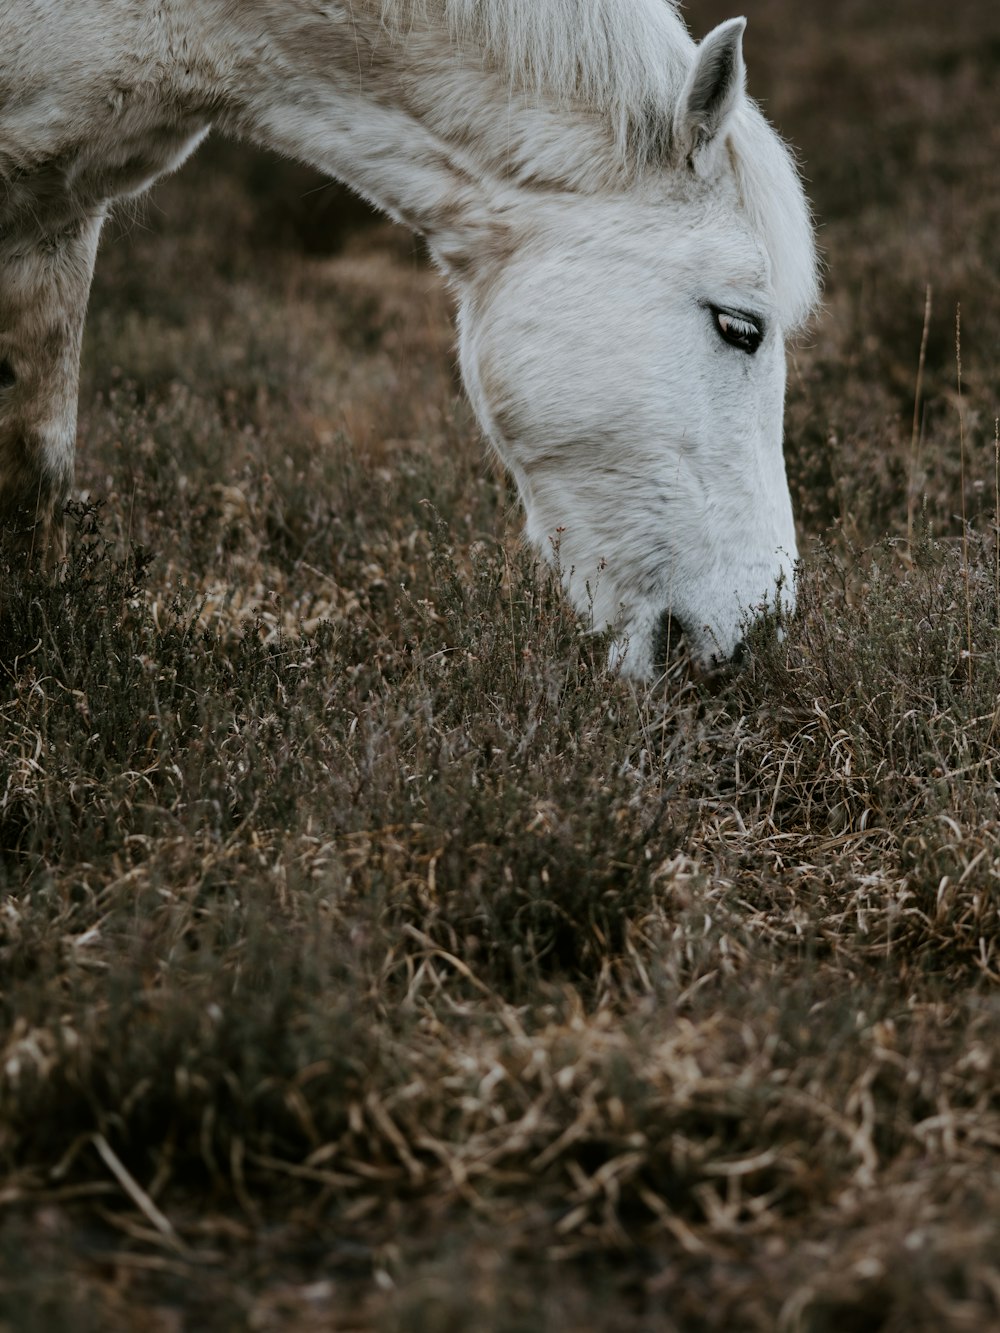 white horse eating grass on the field